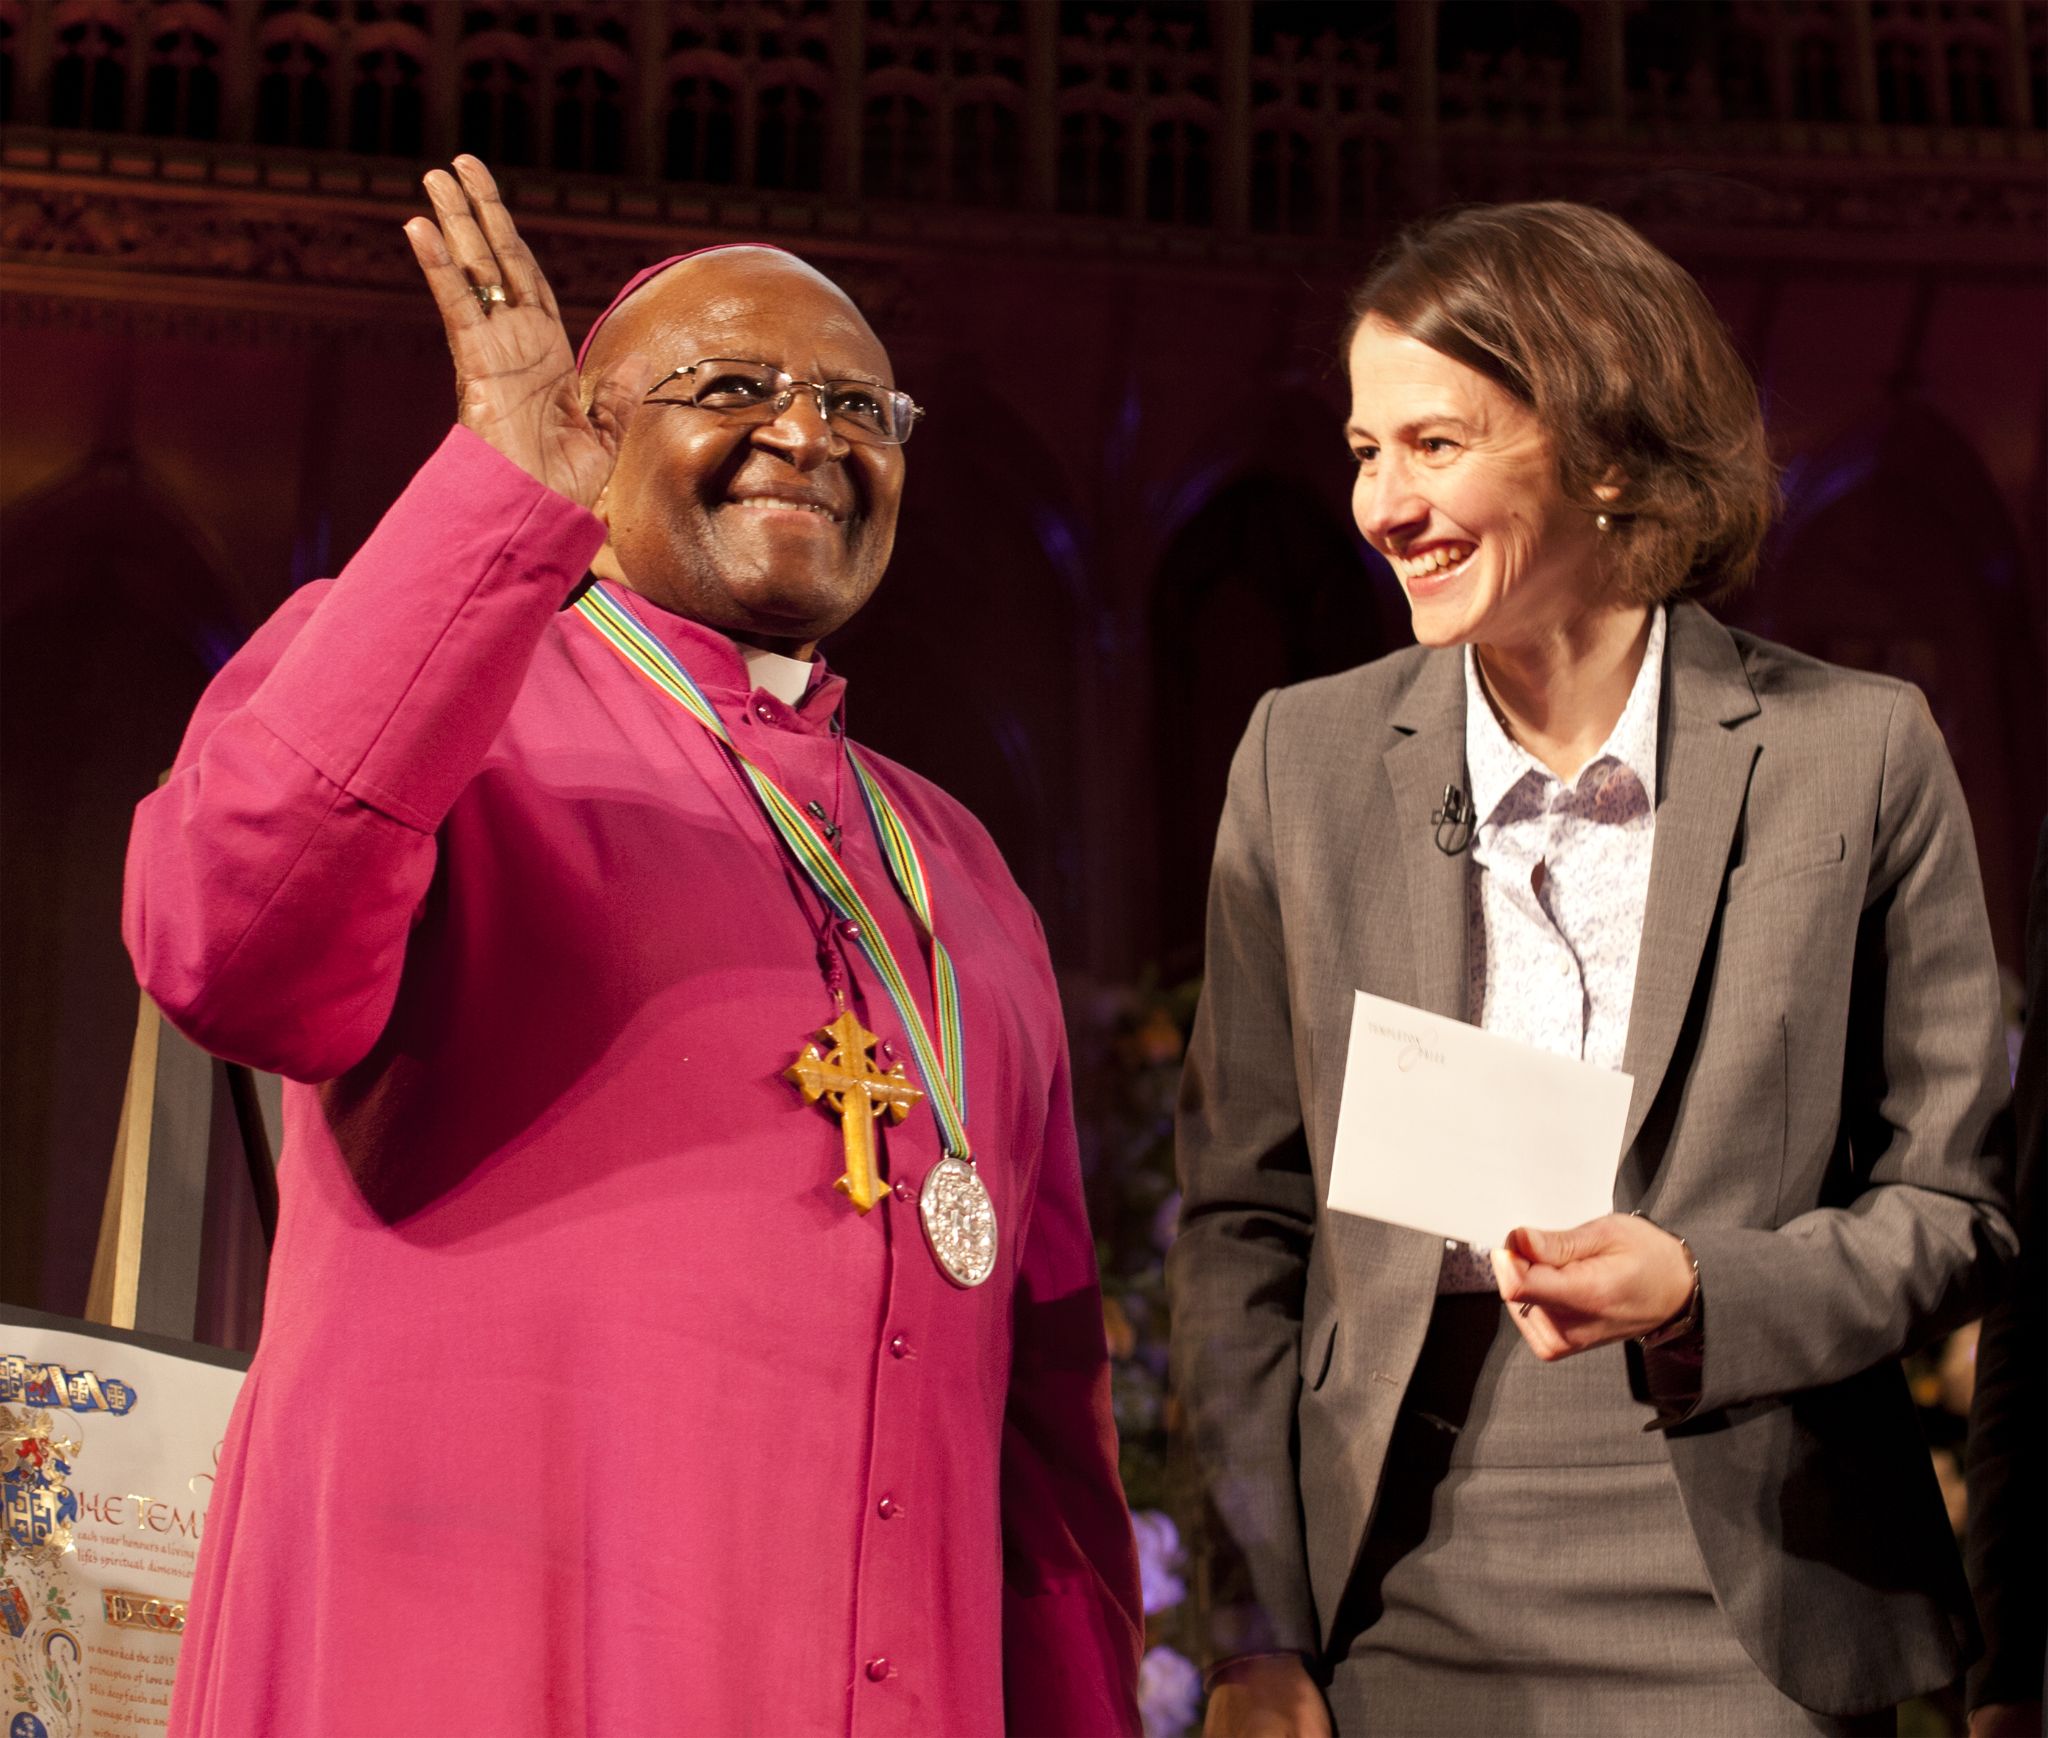 Desmond Tutu 2013 Laureate of Templeton Prize smiling and waving at Prize Ceremony